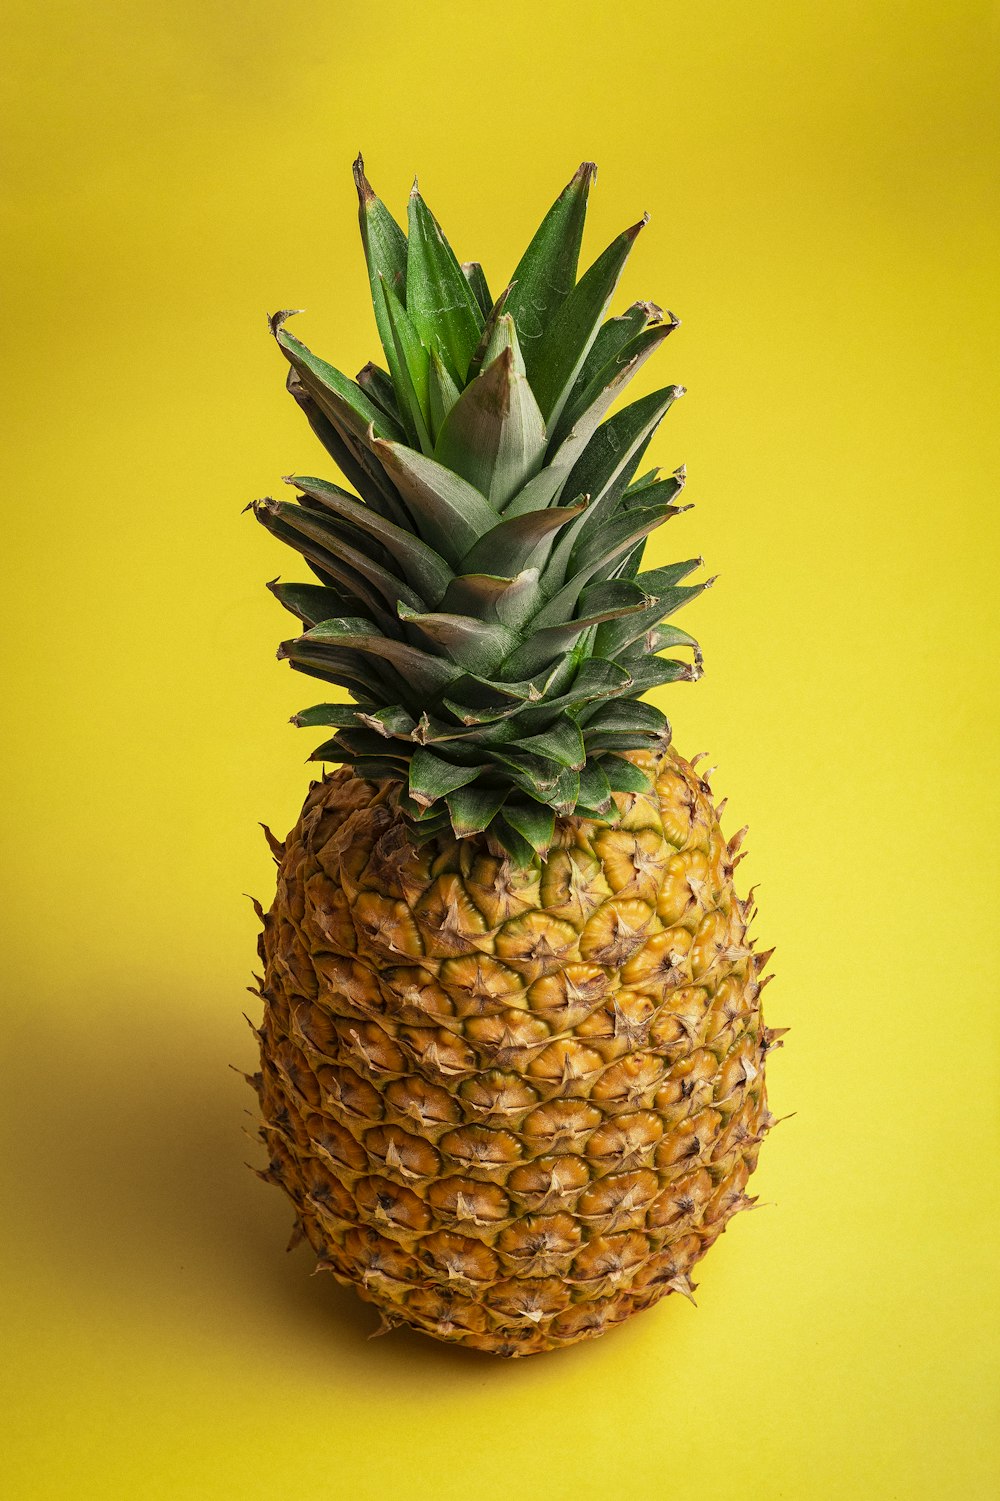 pineapple fruit with yellow background